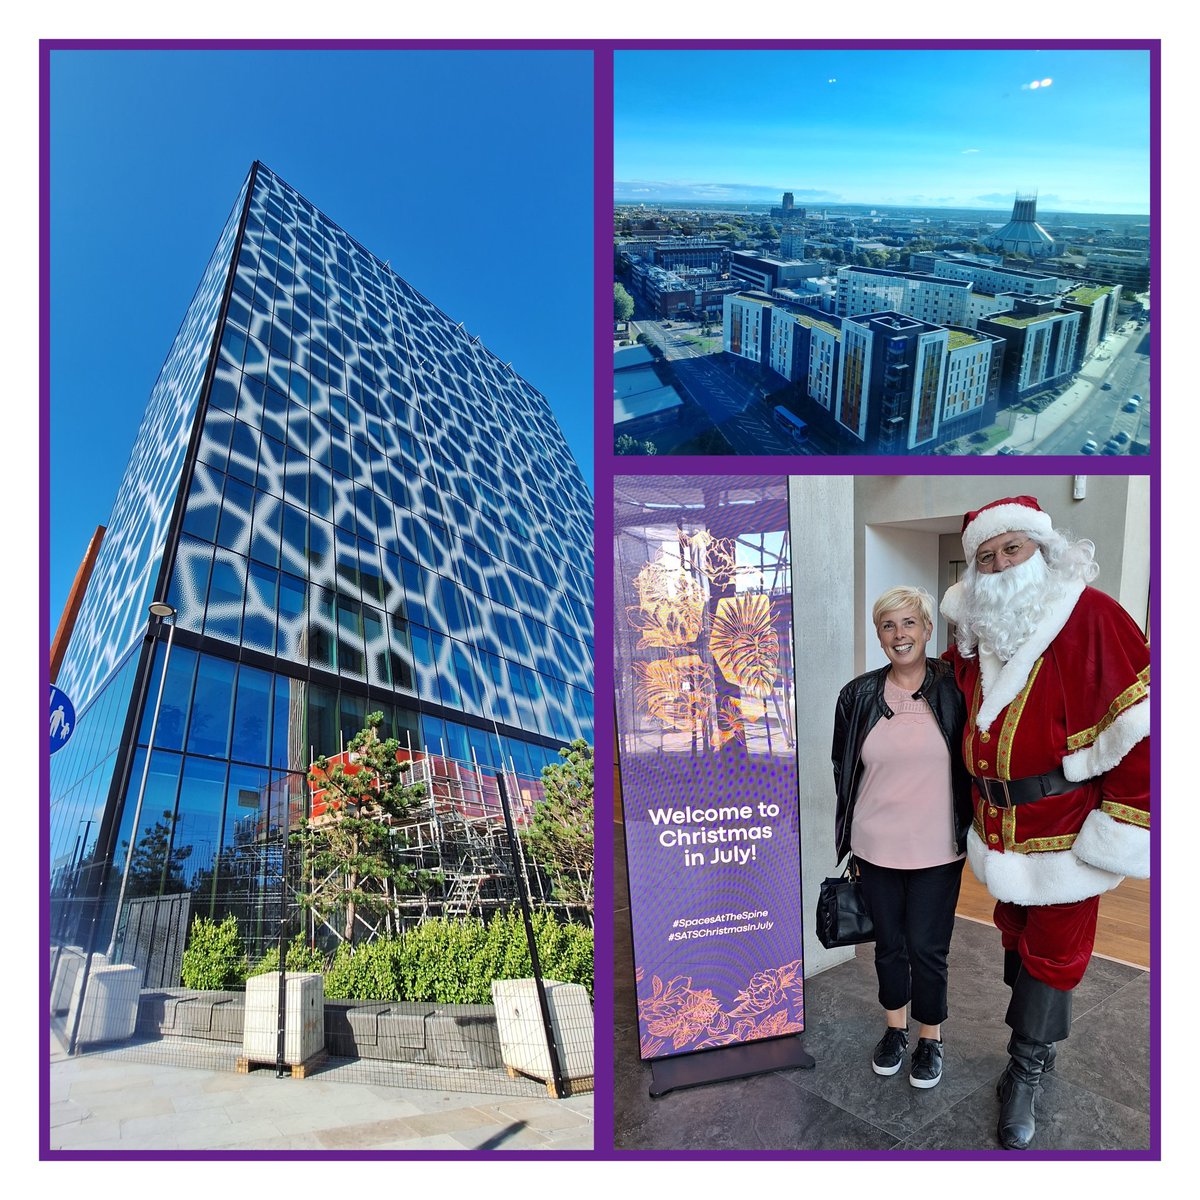 Thank you to @RCPspaces for the invite to #satschristmasinjuly
What an amazing view and building.
#spacesatthespine
@CultureLPool @lpoolcouncil @LpoolMarketing @VisitLiverpool @SGHLpool @TownHallLpool @Liverpool_ONE